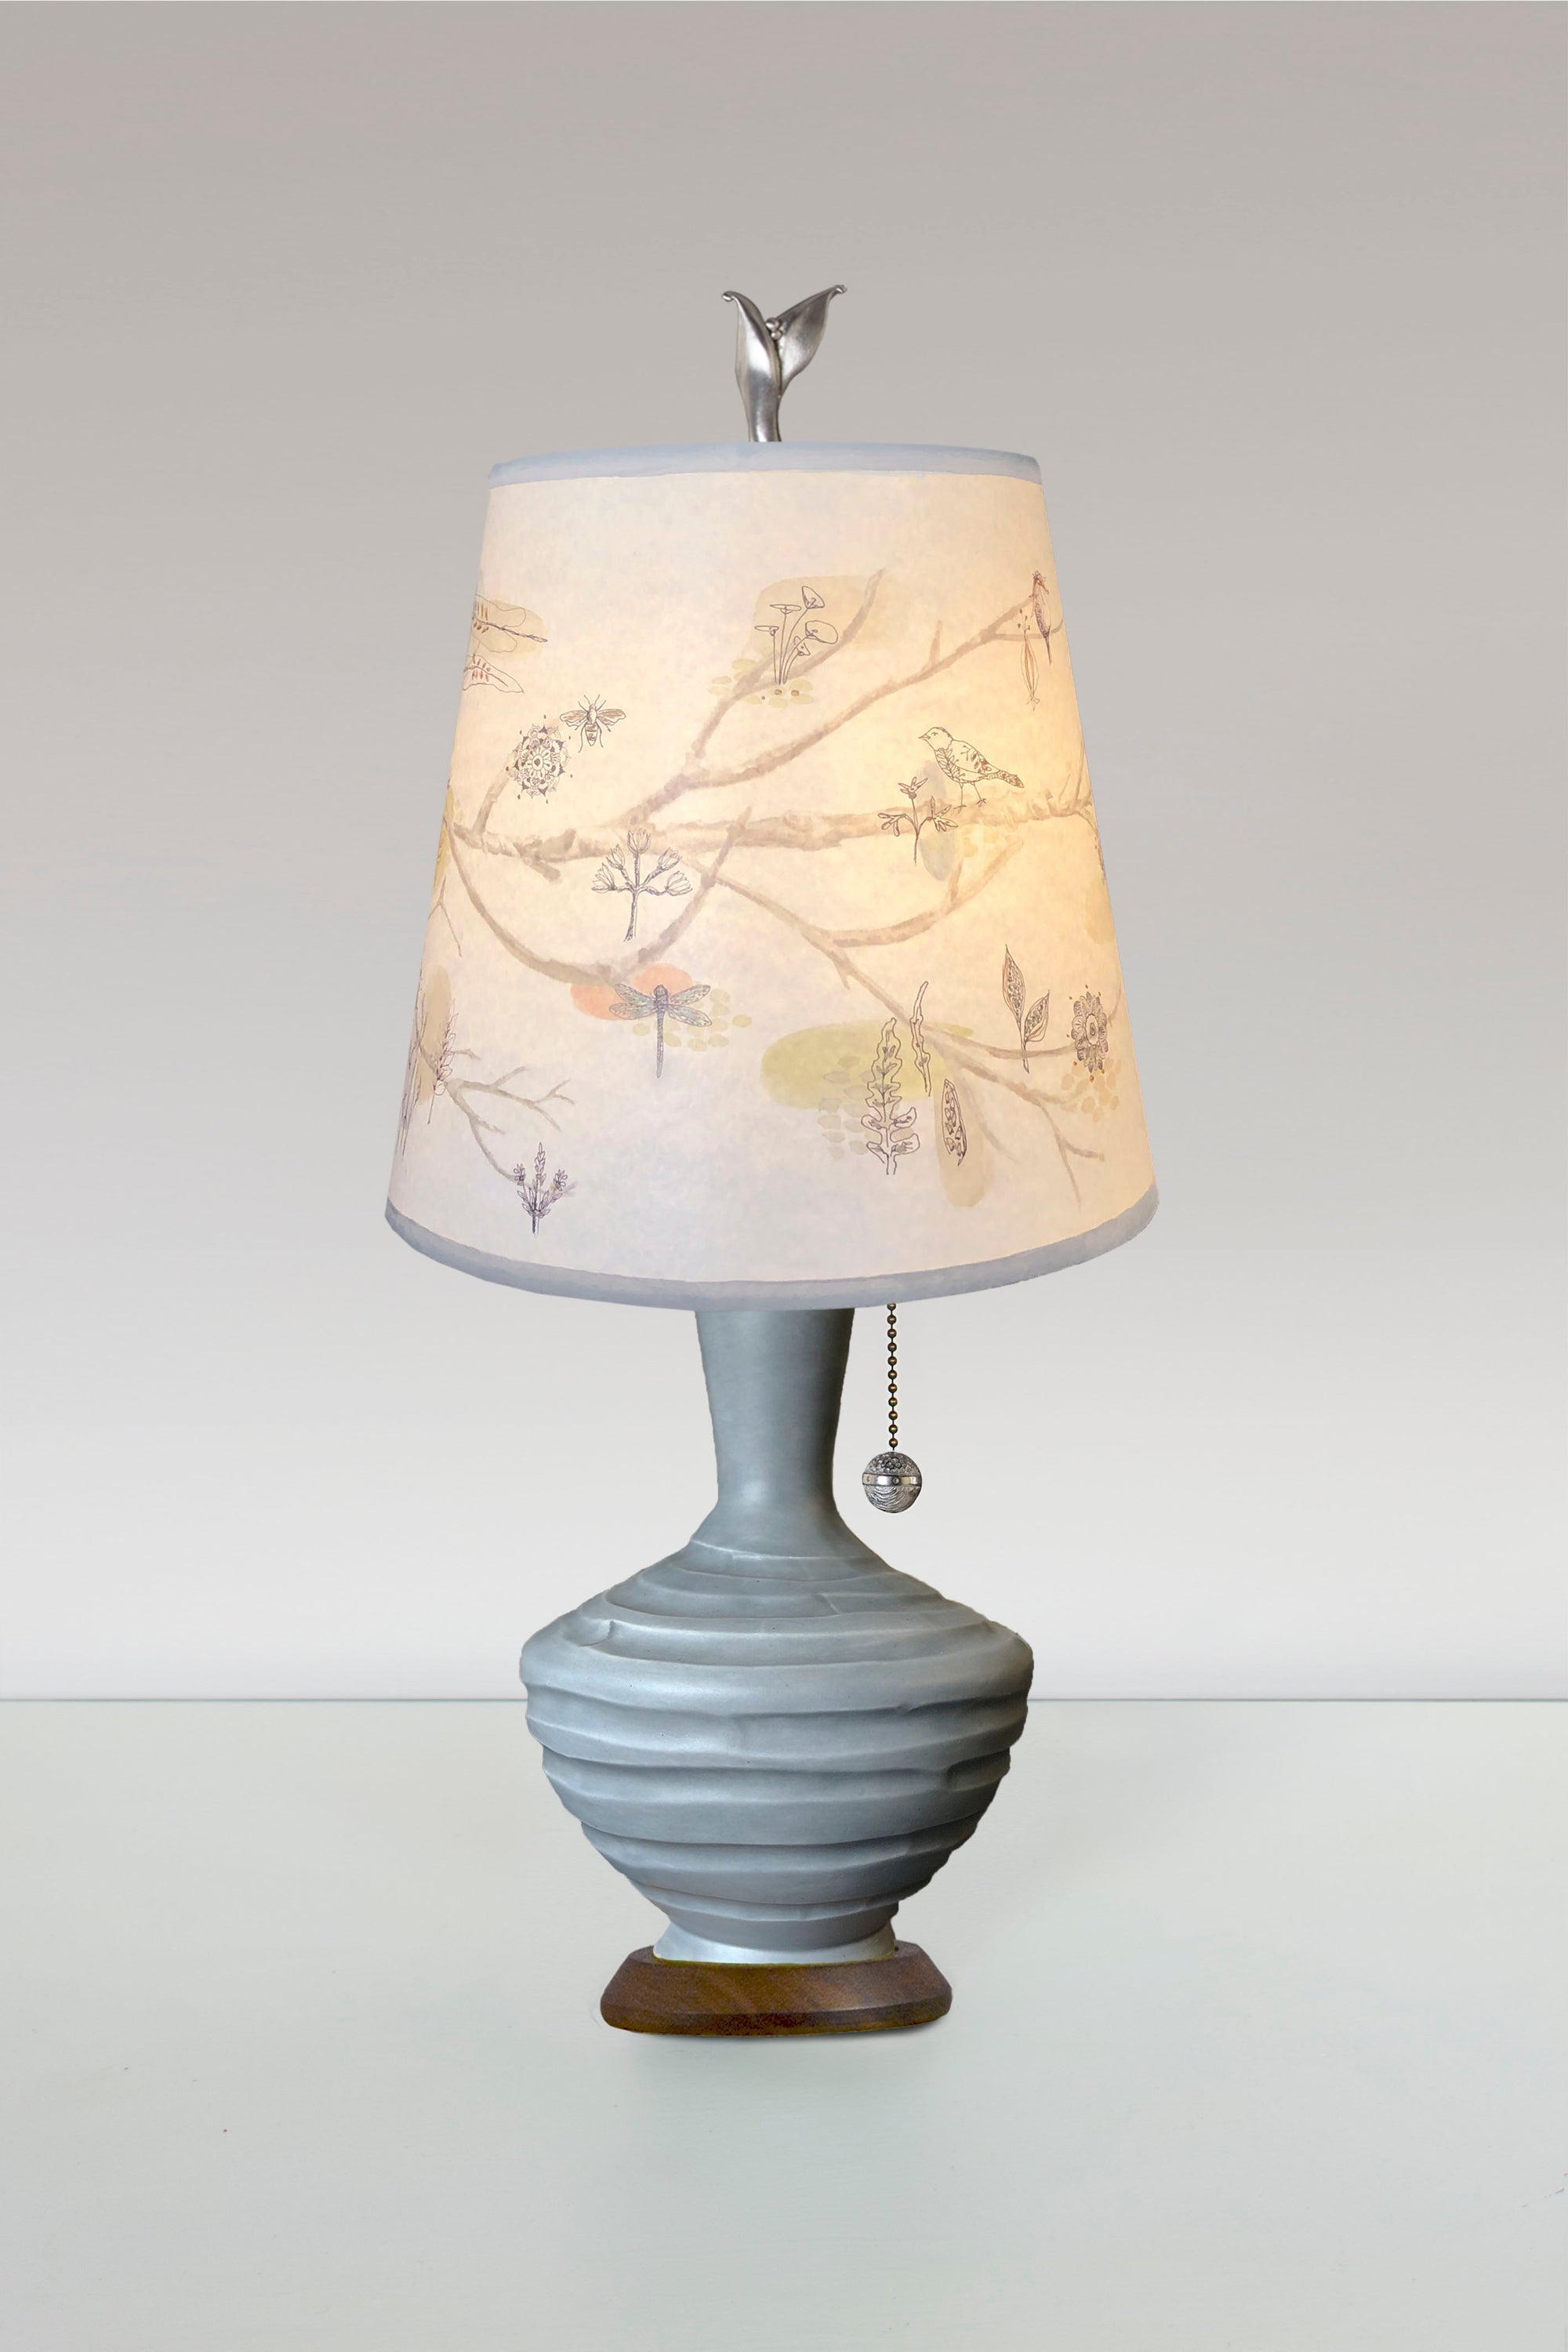 Janna Ugone & Co Table Lamps Ceramic Table Lamp with Small Drum Shade in Artful Branch